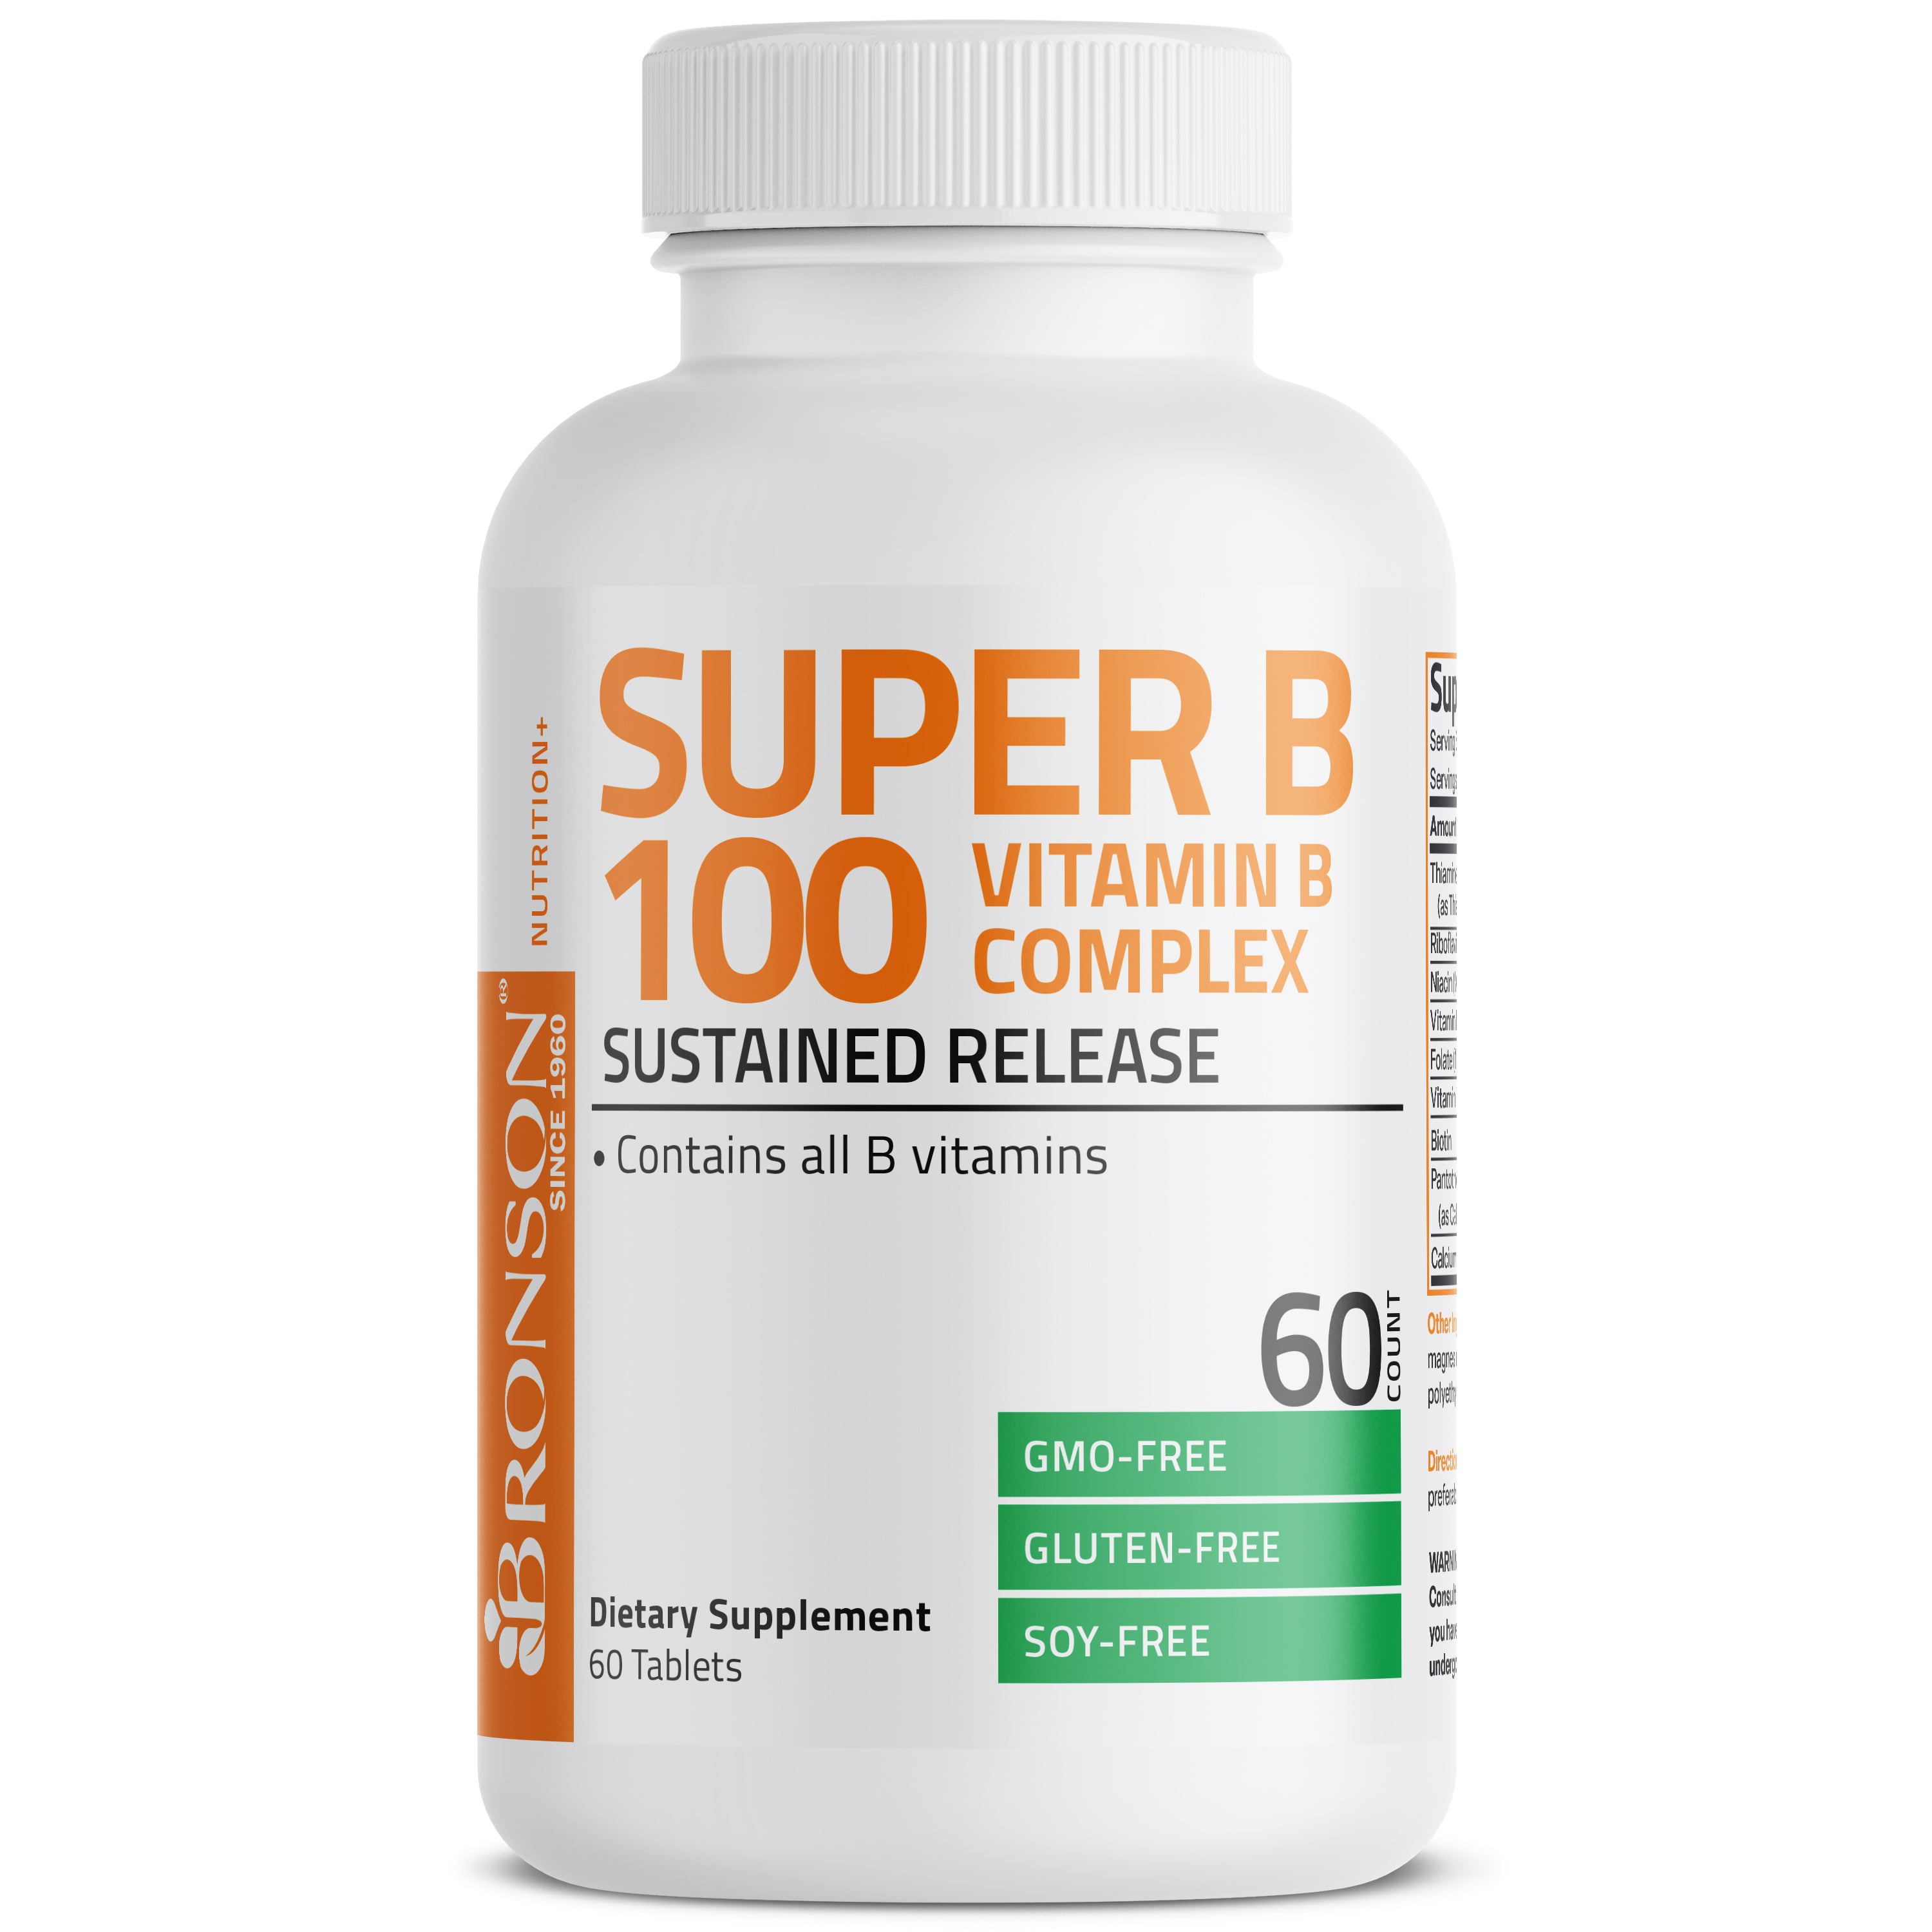 Super Vitamin B 100 Complex Sustained Release view 17 of 6